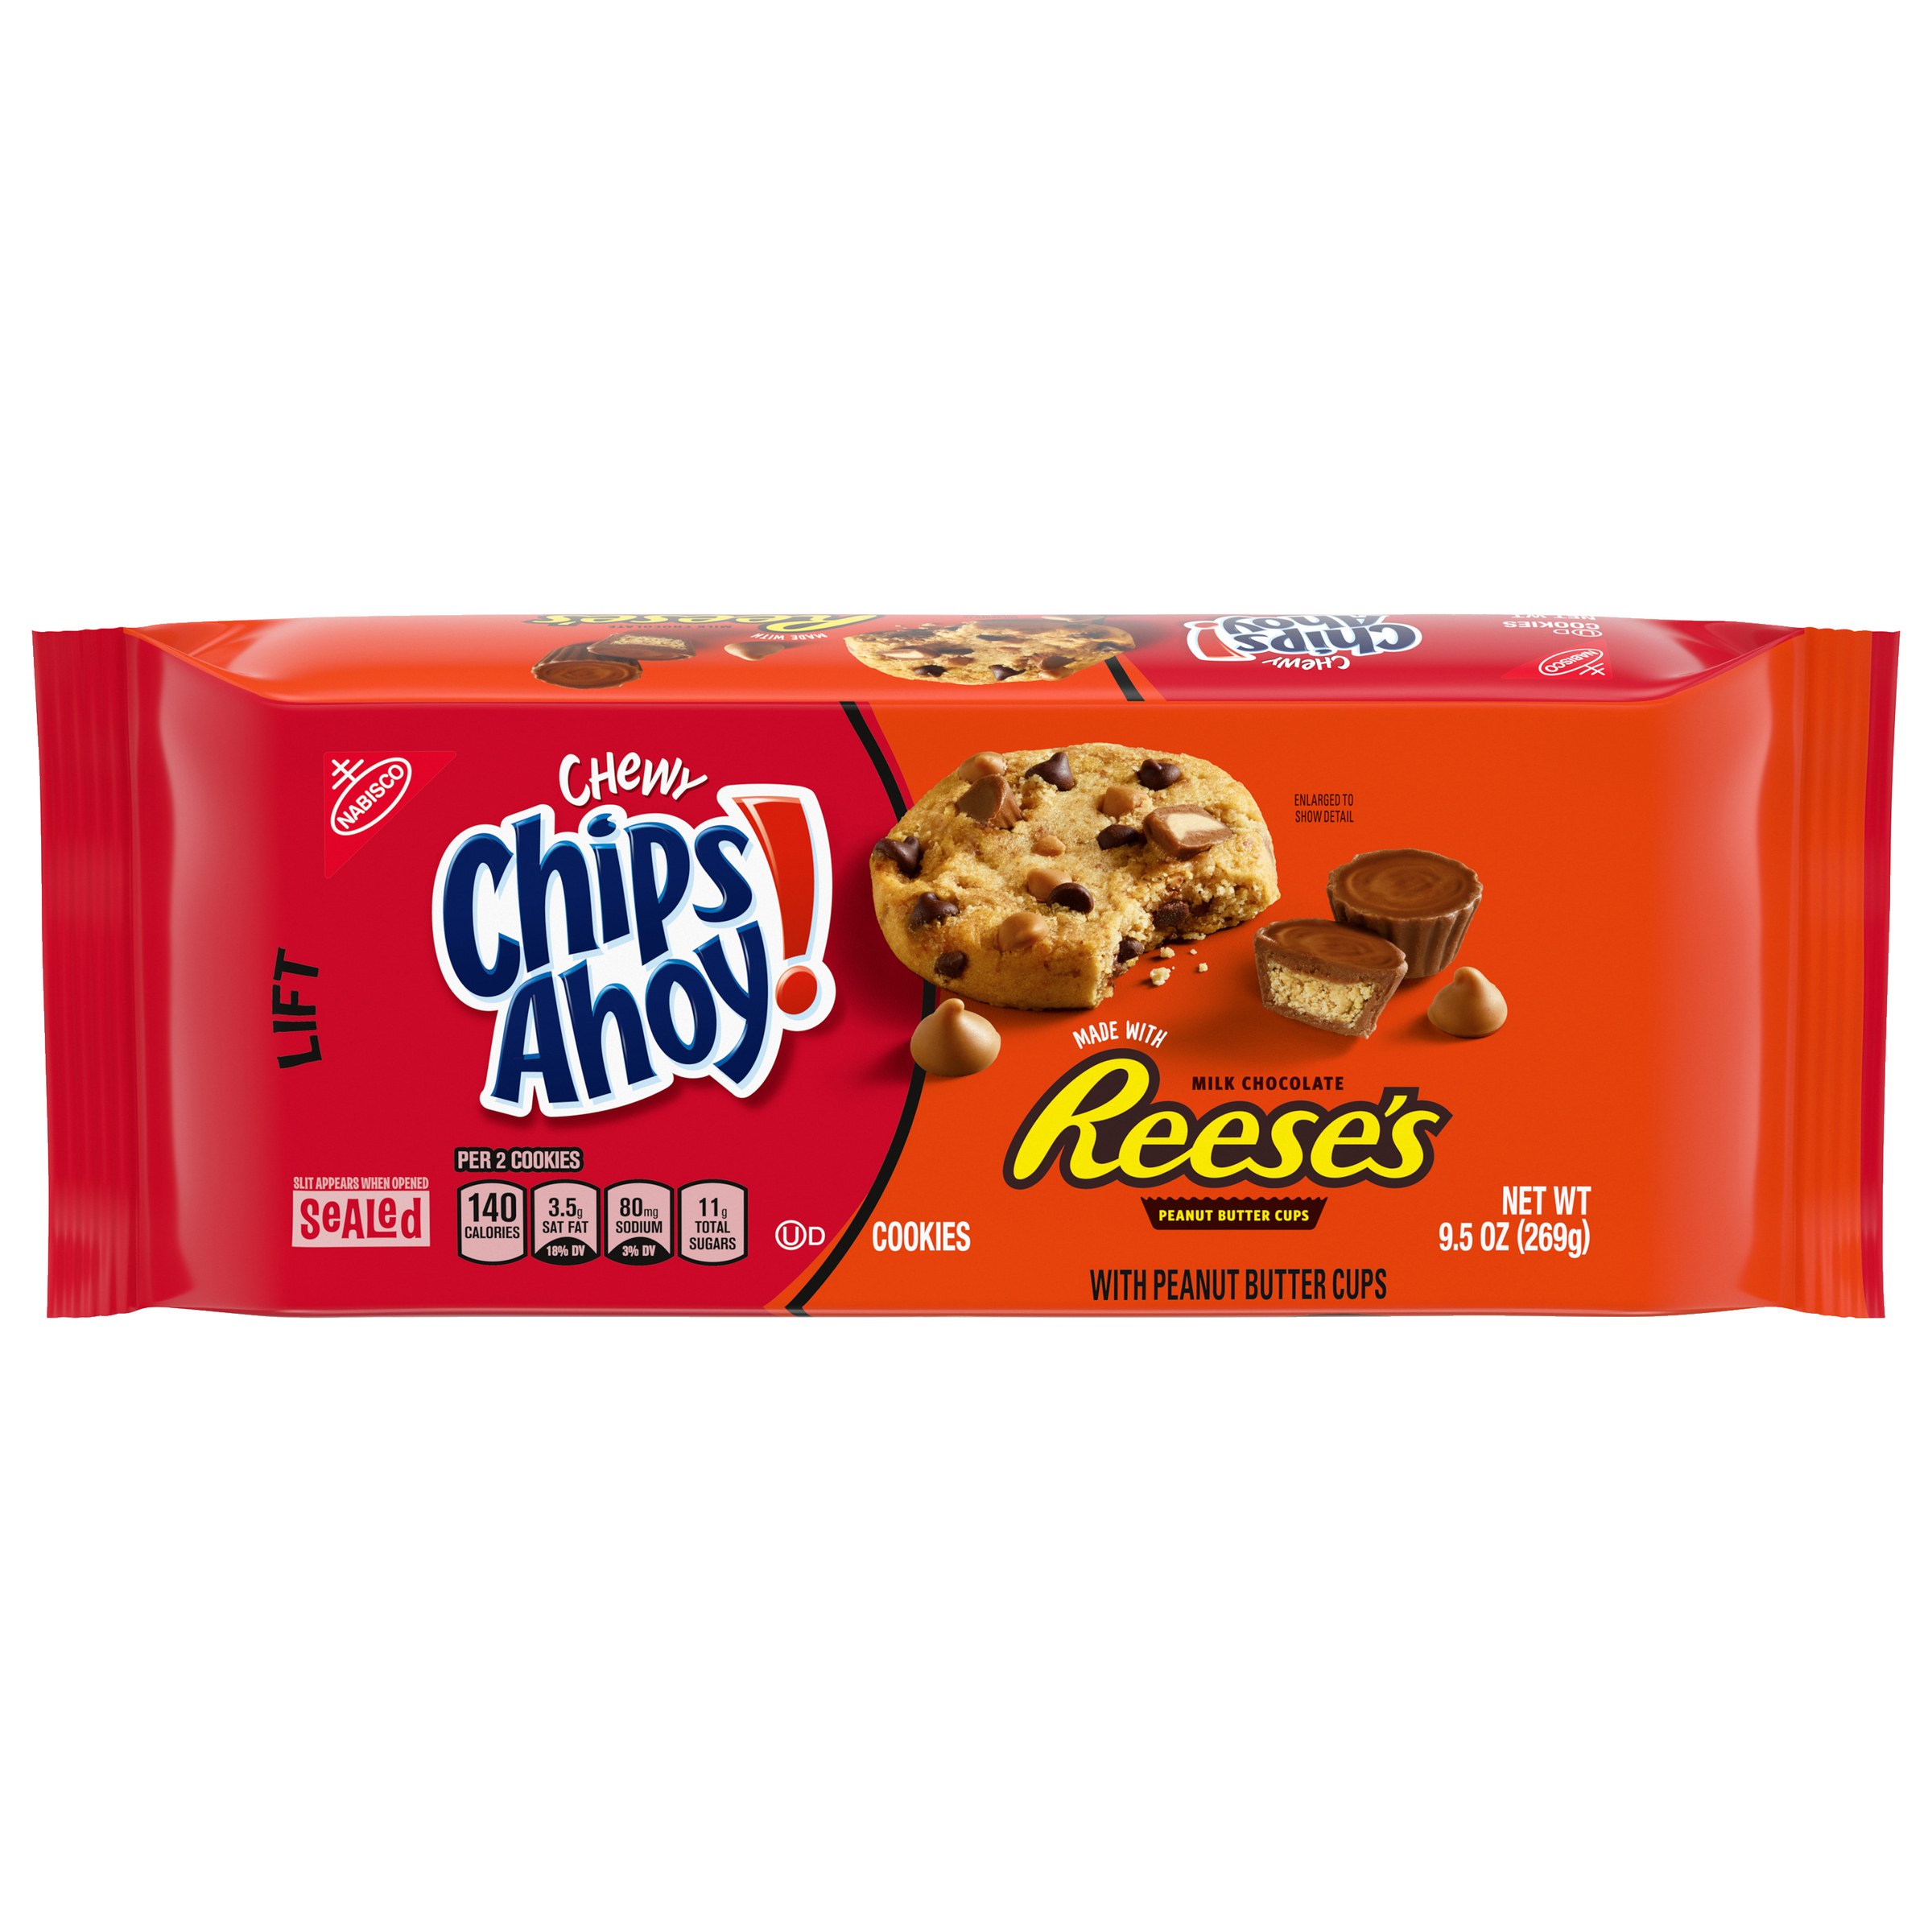 CHIPS AHOY! Chewy Chocolate Chip Cookies with Reese's Peanut Butter Cups, 9.5 oz